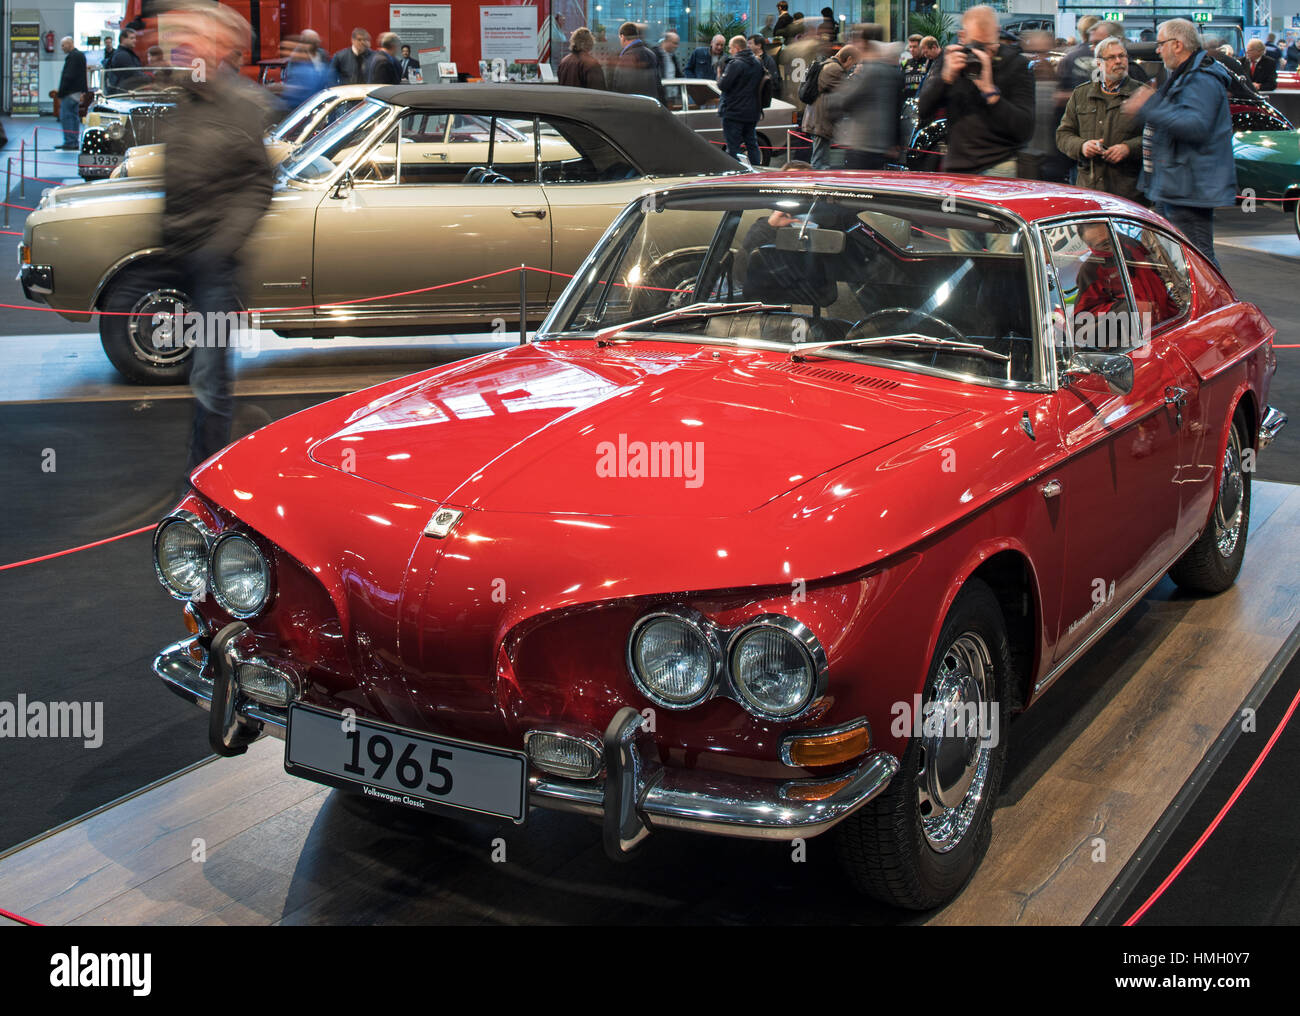 Dremen, Germany. 03rd Feb, 2017. Visitors to the 'Bremen Classic Motorshow' look at a VW Karmann-Ghia 1600 TC, a coupe study from 1965, in Dremen, Germany, 03 February 2017. The car is from the Karmann Museum at the VW plant in Osnabrueck, Germany, and is part of this year's special exhibition 'The Treasury of Karmann' with thirteen rarities and styles studies that never became a series. The 'Bremen Classic Motorshow' continues until 05 February 2017. Photo: Ingo Wagner/dpa/Alamy Live News Stock Photo